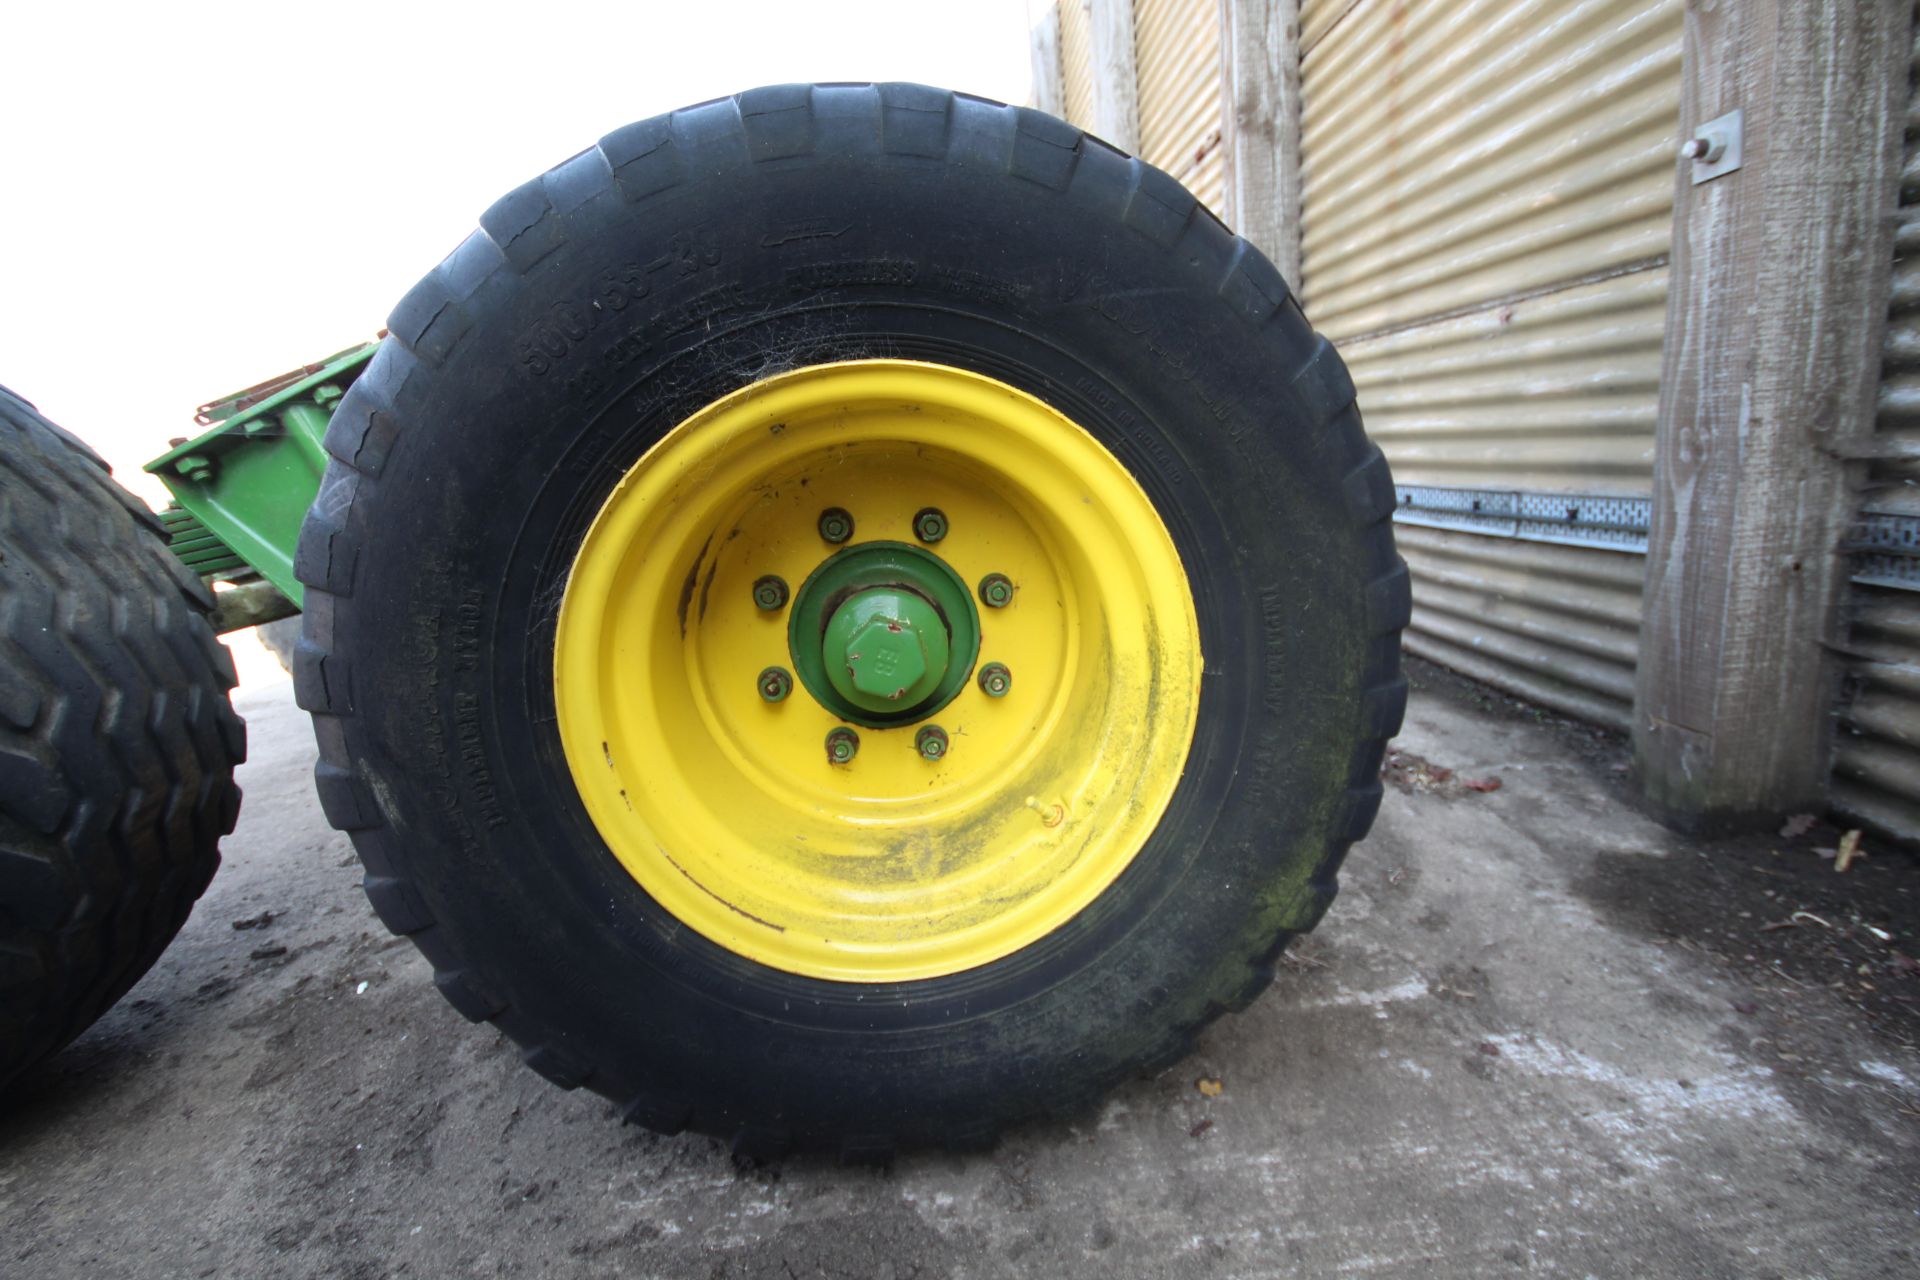 Twin axle agricultural trailer bogie. With floatation wheels and tyres. - Image 23 of 25